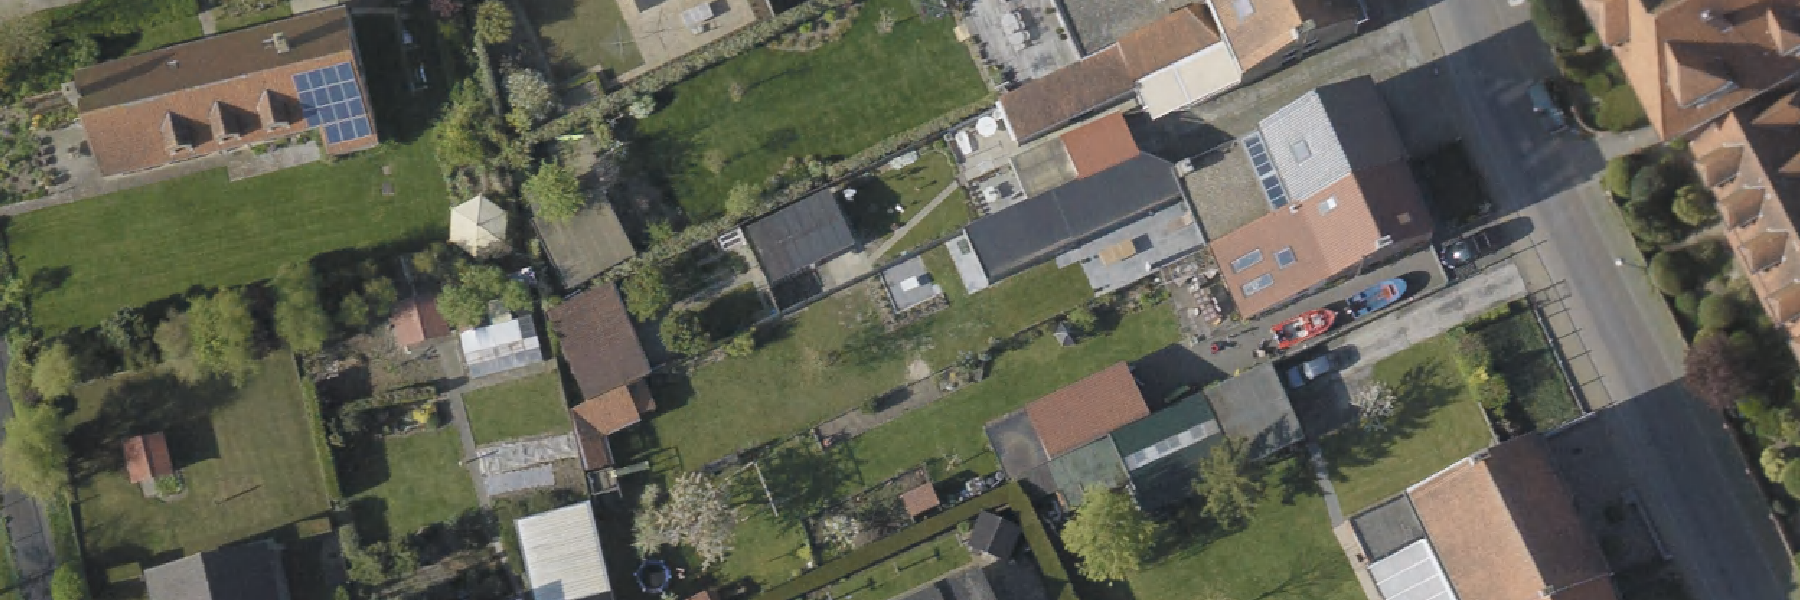 A typical Flemish neighborhood viewed from above. While detailed inventory of the bigger buildings and roads exist, that is typically not the case for smaller sources of soil cover which are omnipresent in the Flemish landscape.